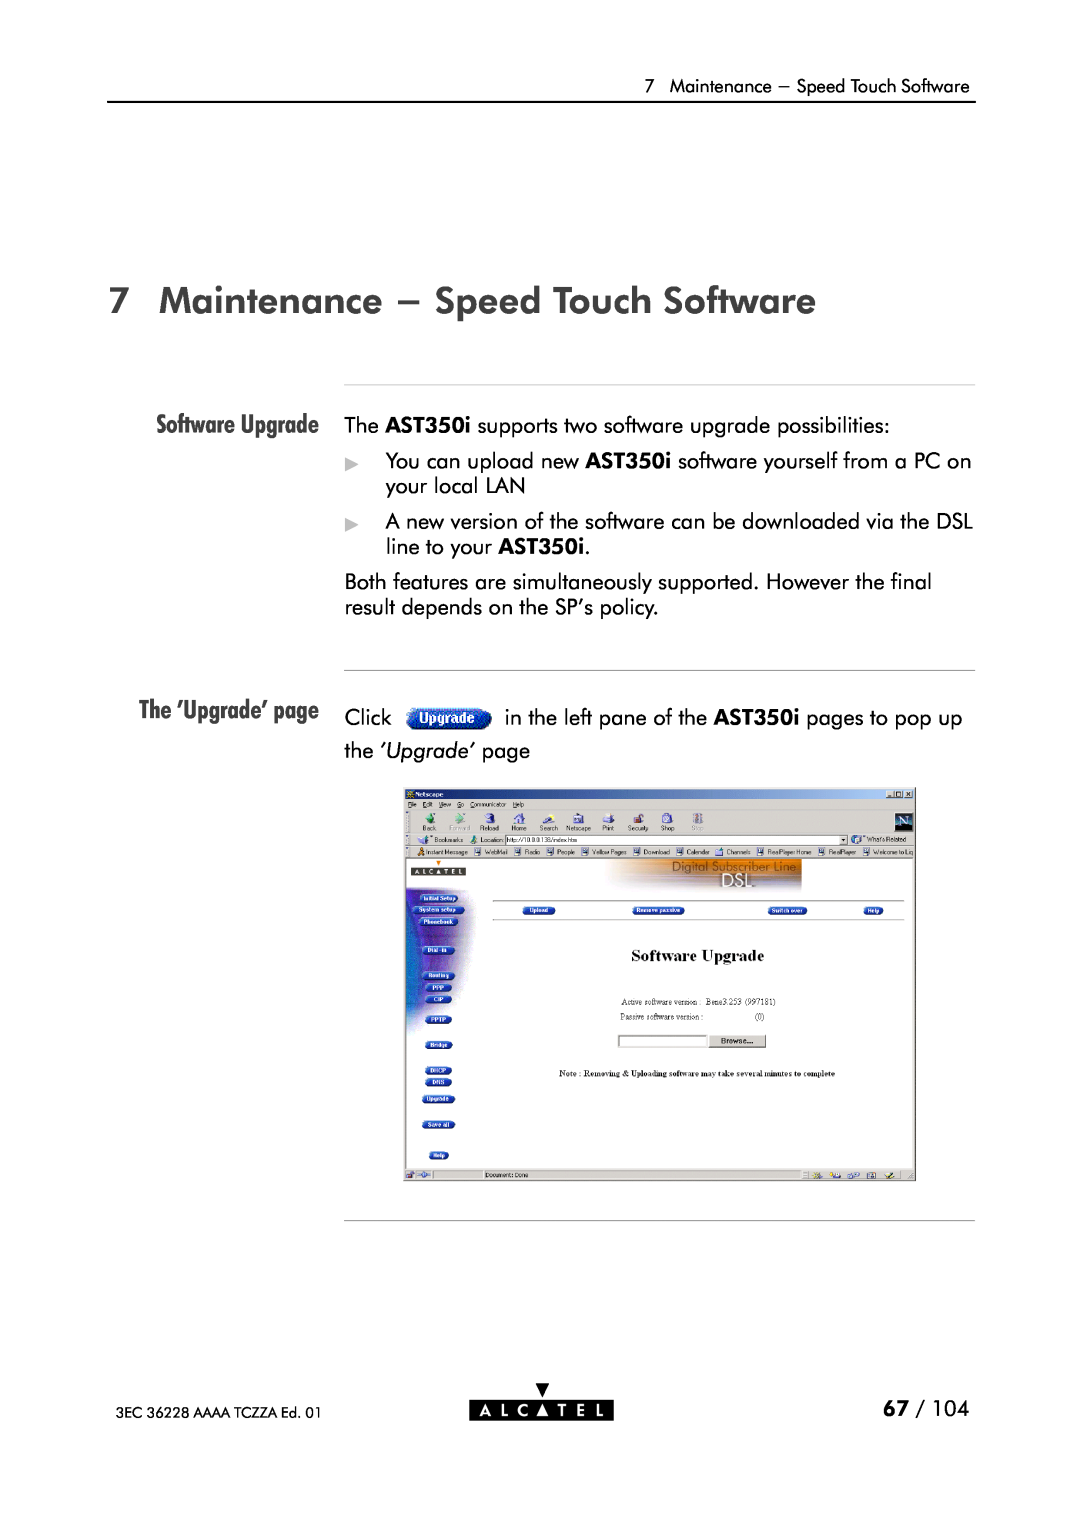 Alcatel Carrier Internetworking Solutions 350I manual Maintenance - Speed Touch Software, The Upgrade page 